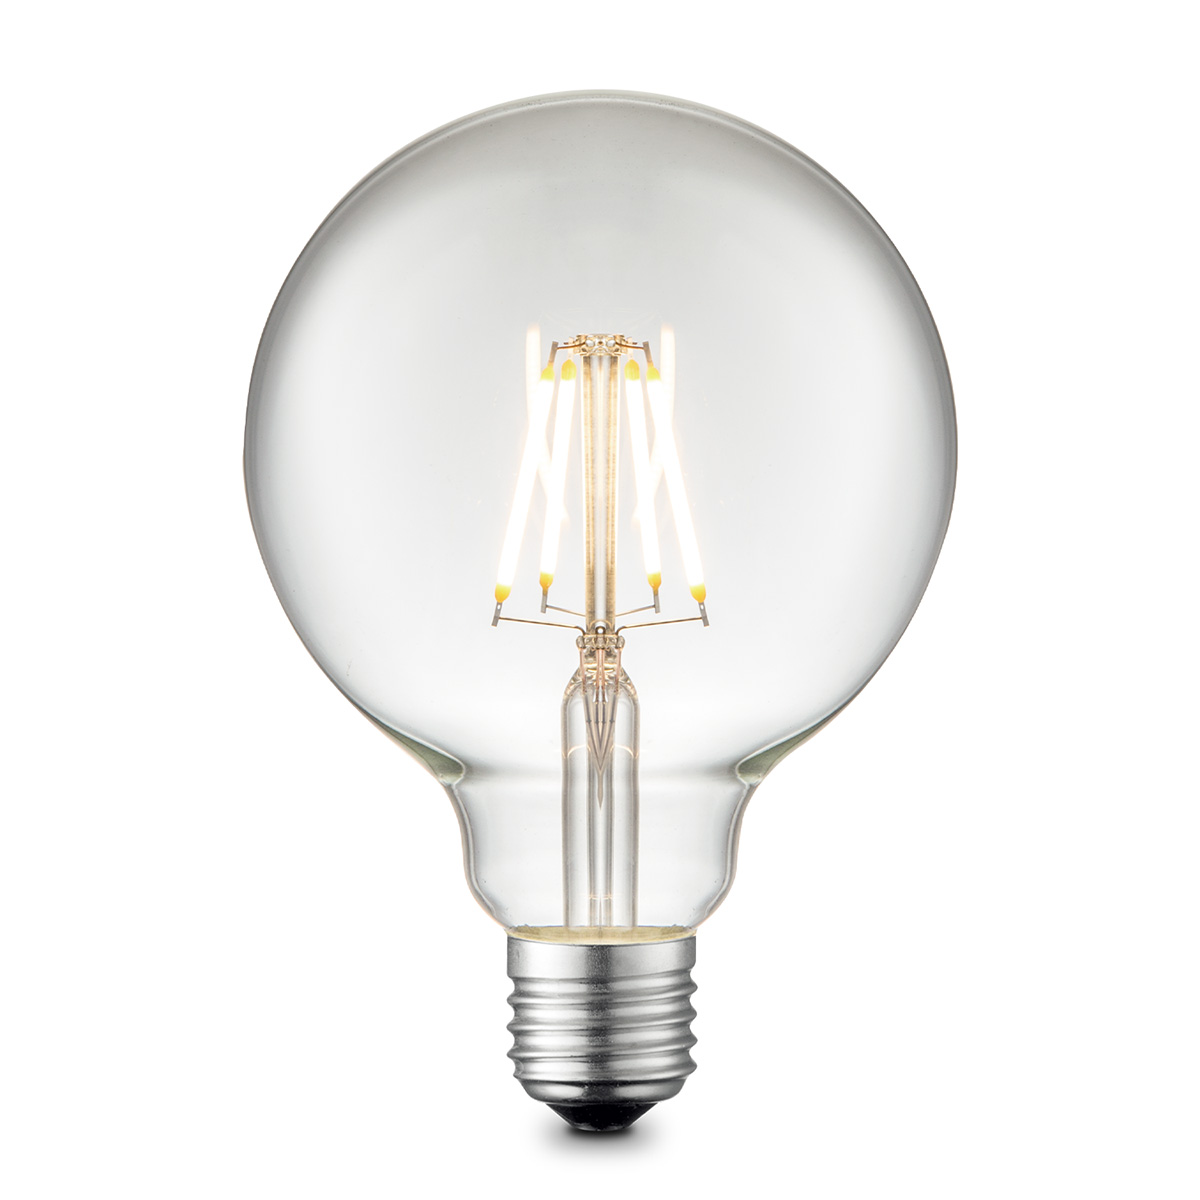 Tangla lighting - TLB-8004-02CL - LED Light Bulb Deco filament - G95 2W clear - non dimmable - E27